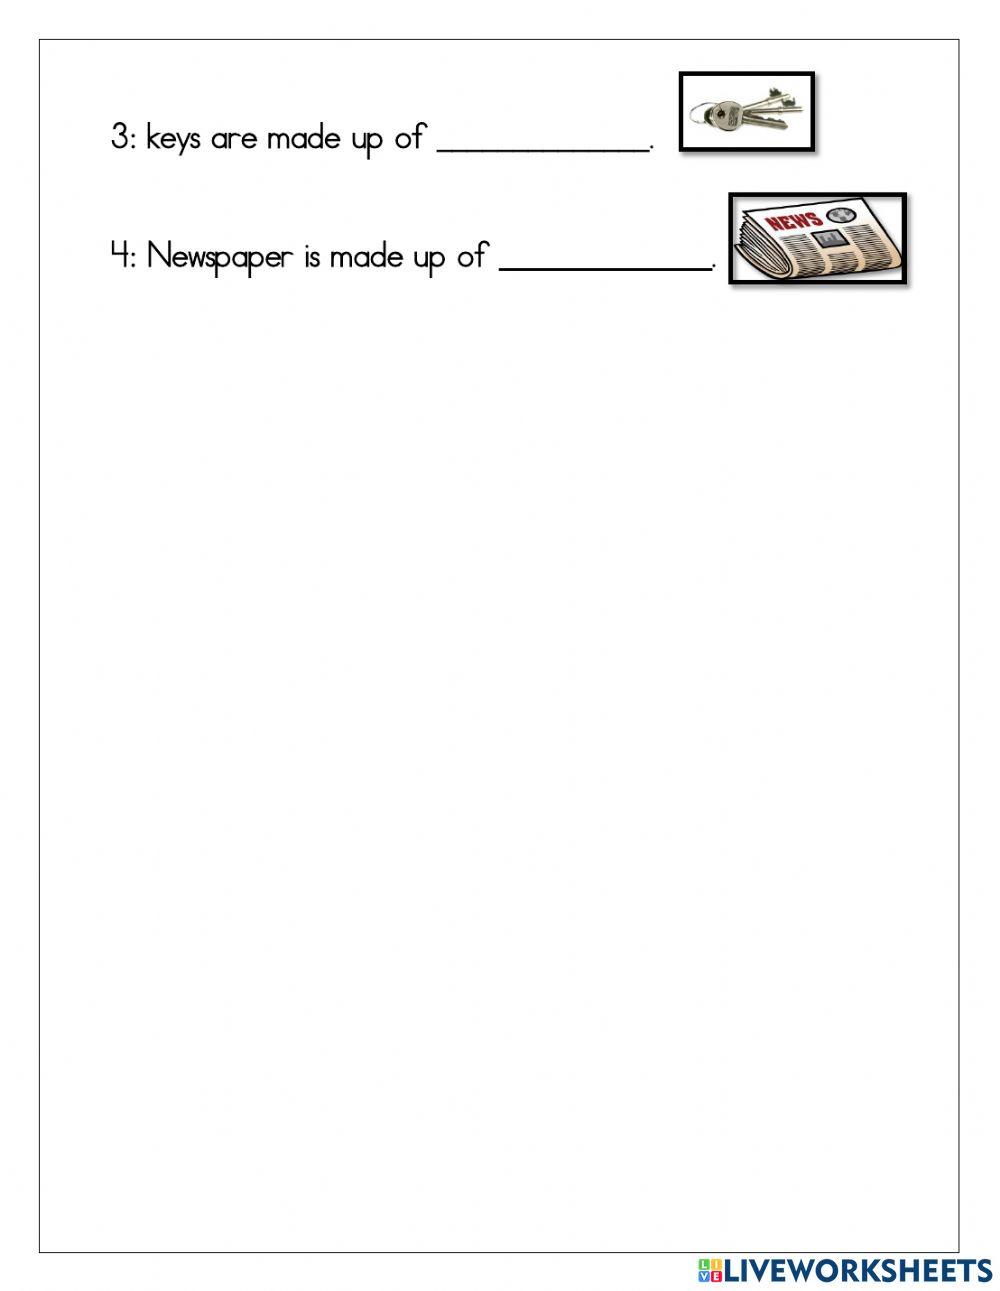 Science day 1 live worksheet material